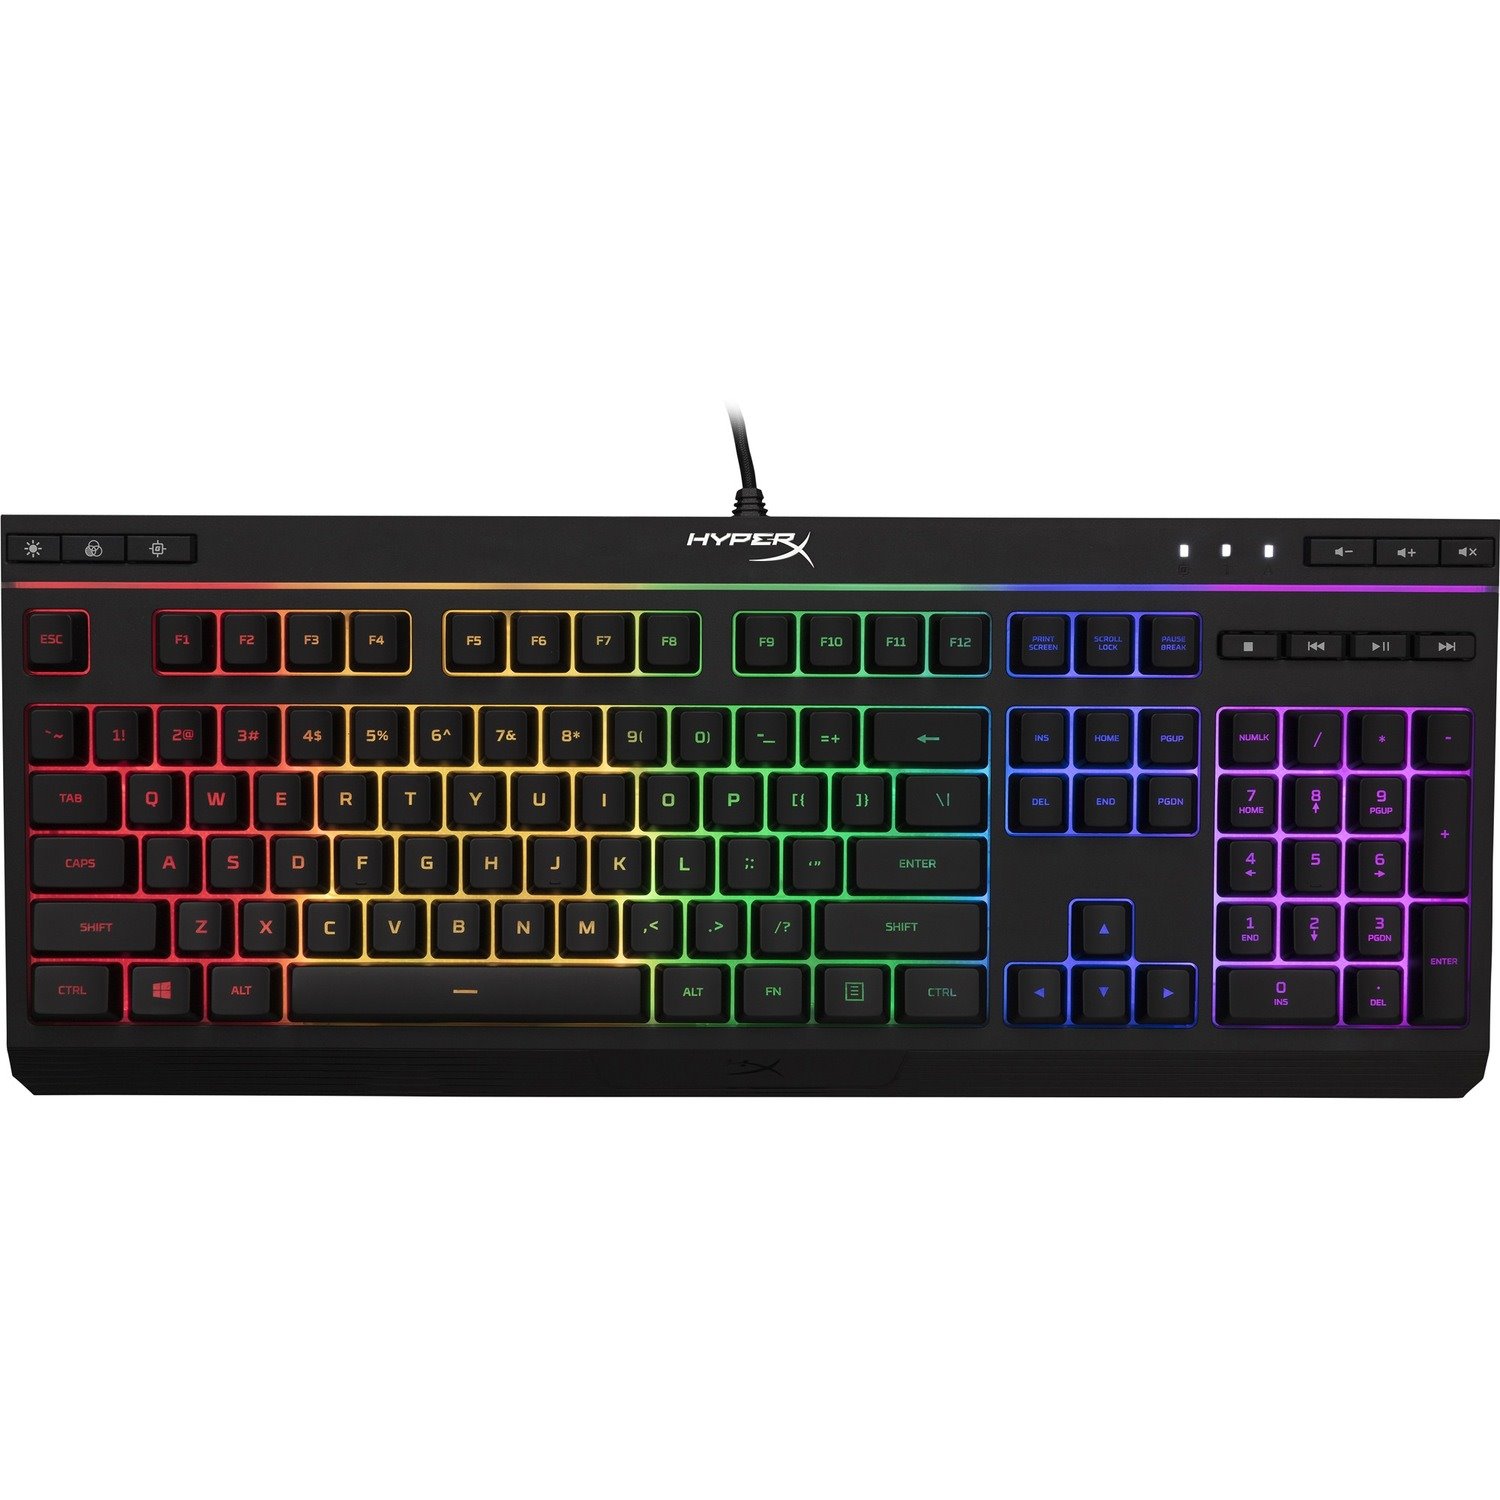 HyperX Alloy Core RGB Gaming Keyboard - Cable Connectivity - RGB LED - English (US) - Black